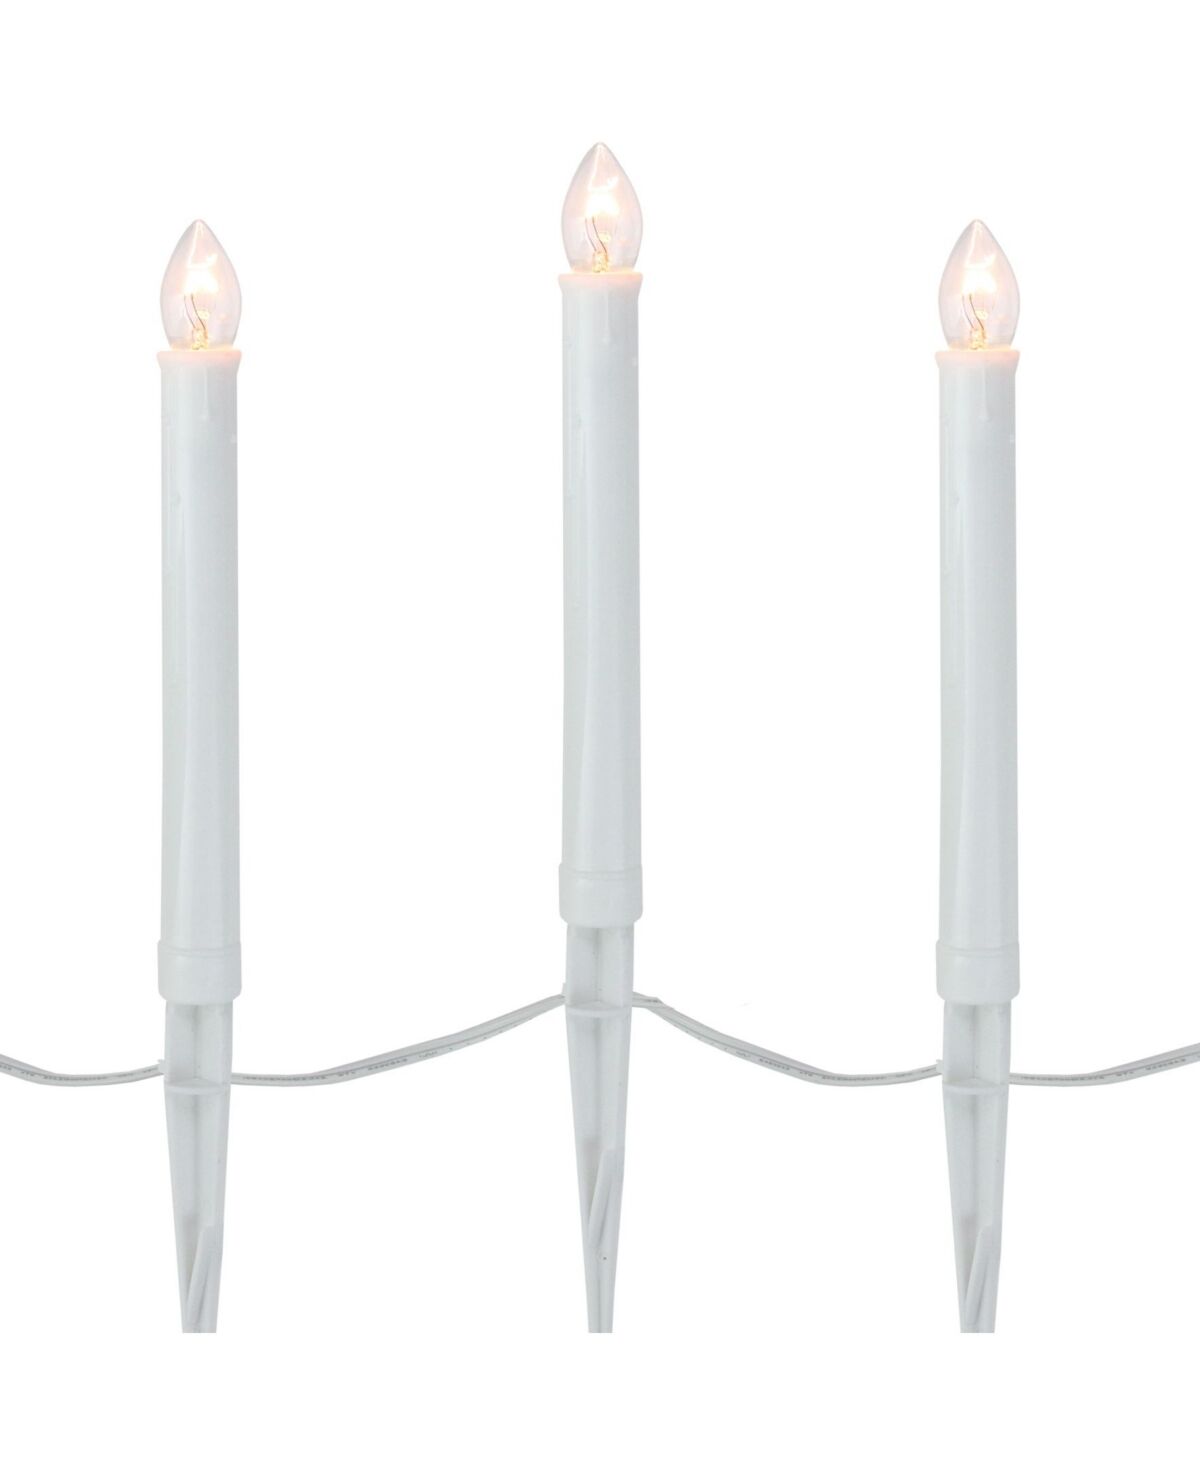 Northlight Set of 10 Lighted C7 Candle Christmas Pathway Markers - Clear Lights - White